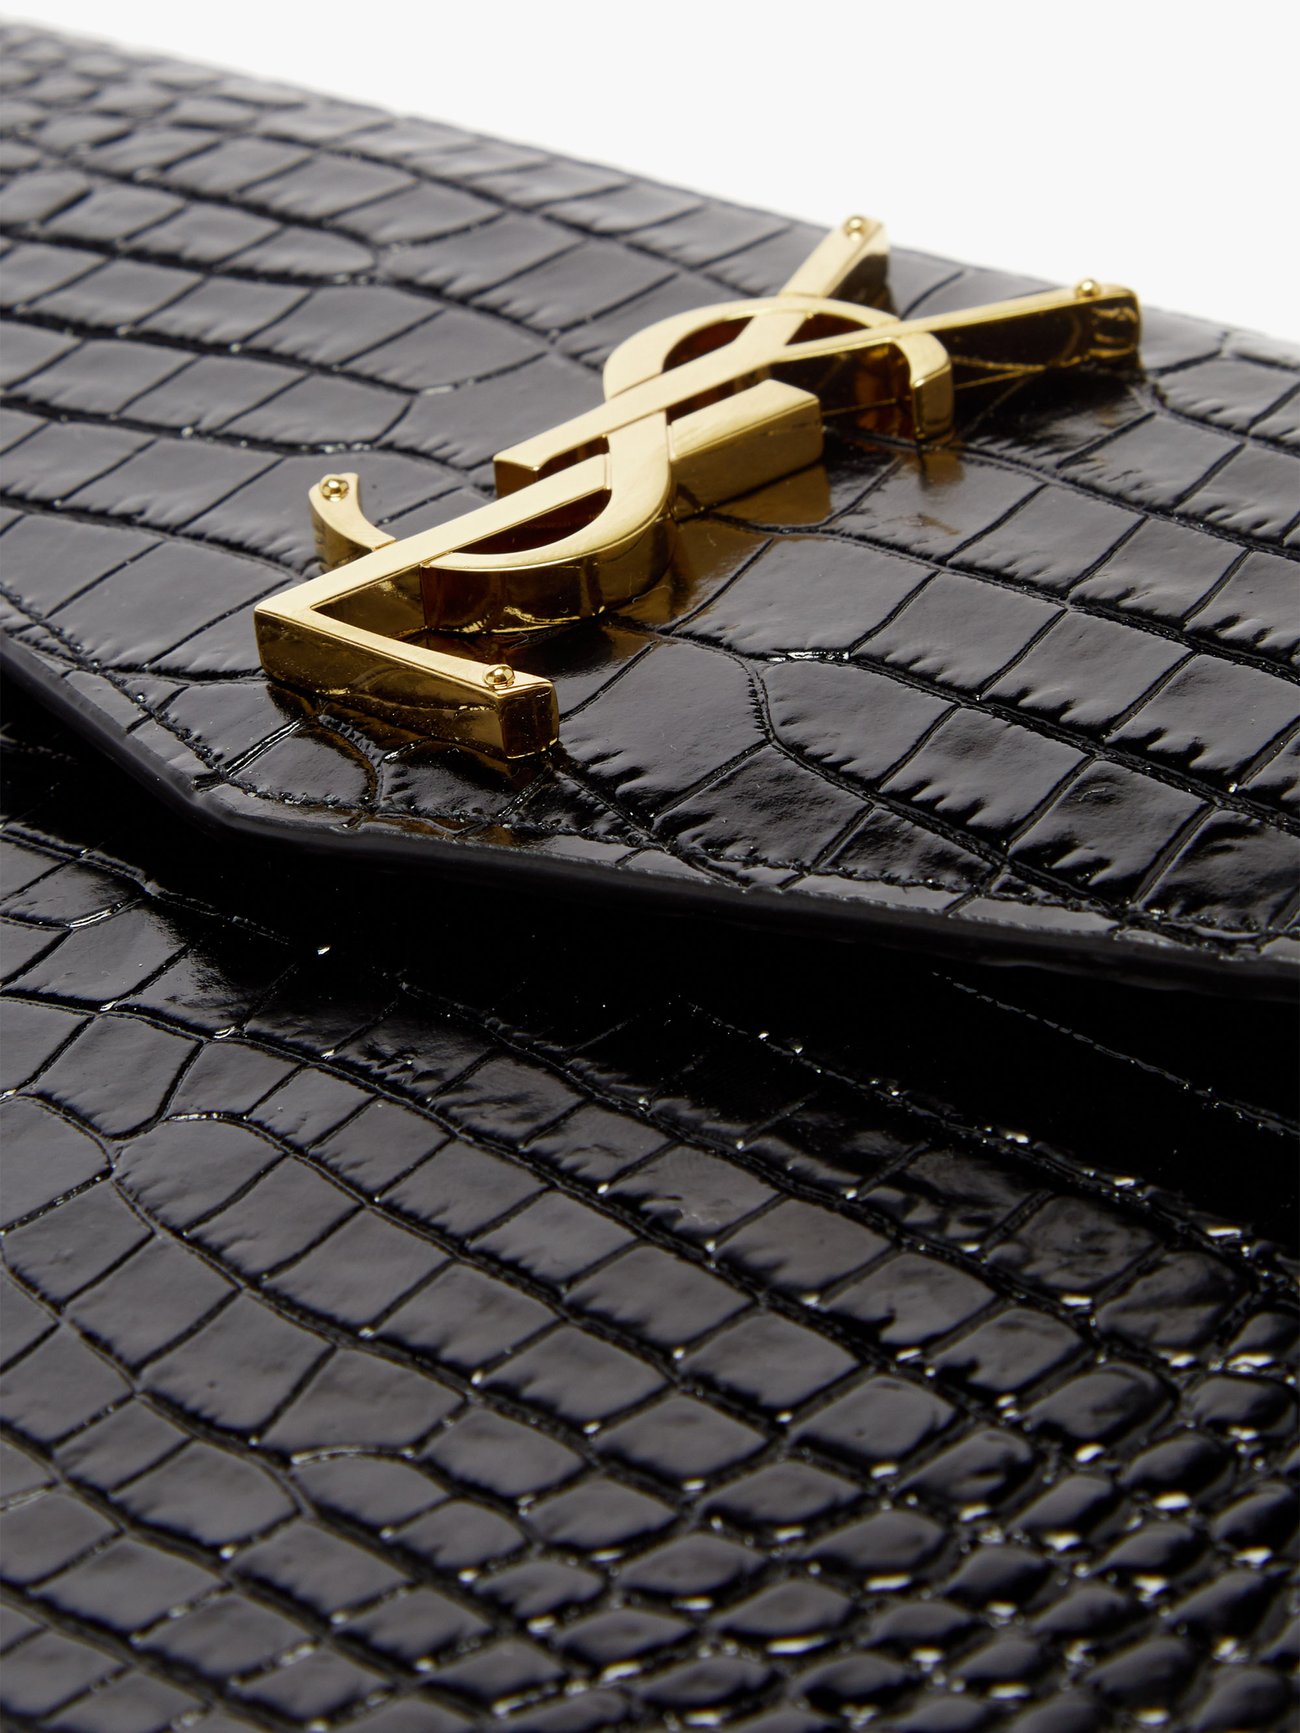 Saint Laurent Uptown Croc-effect Leather Clutch in Red